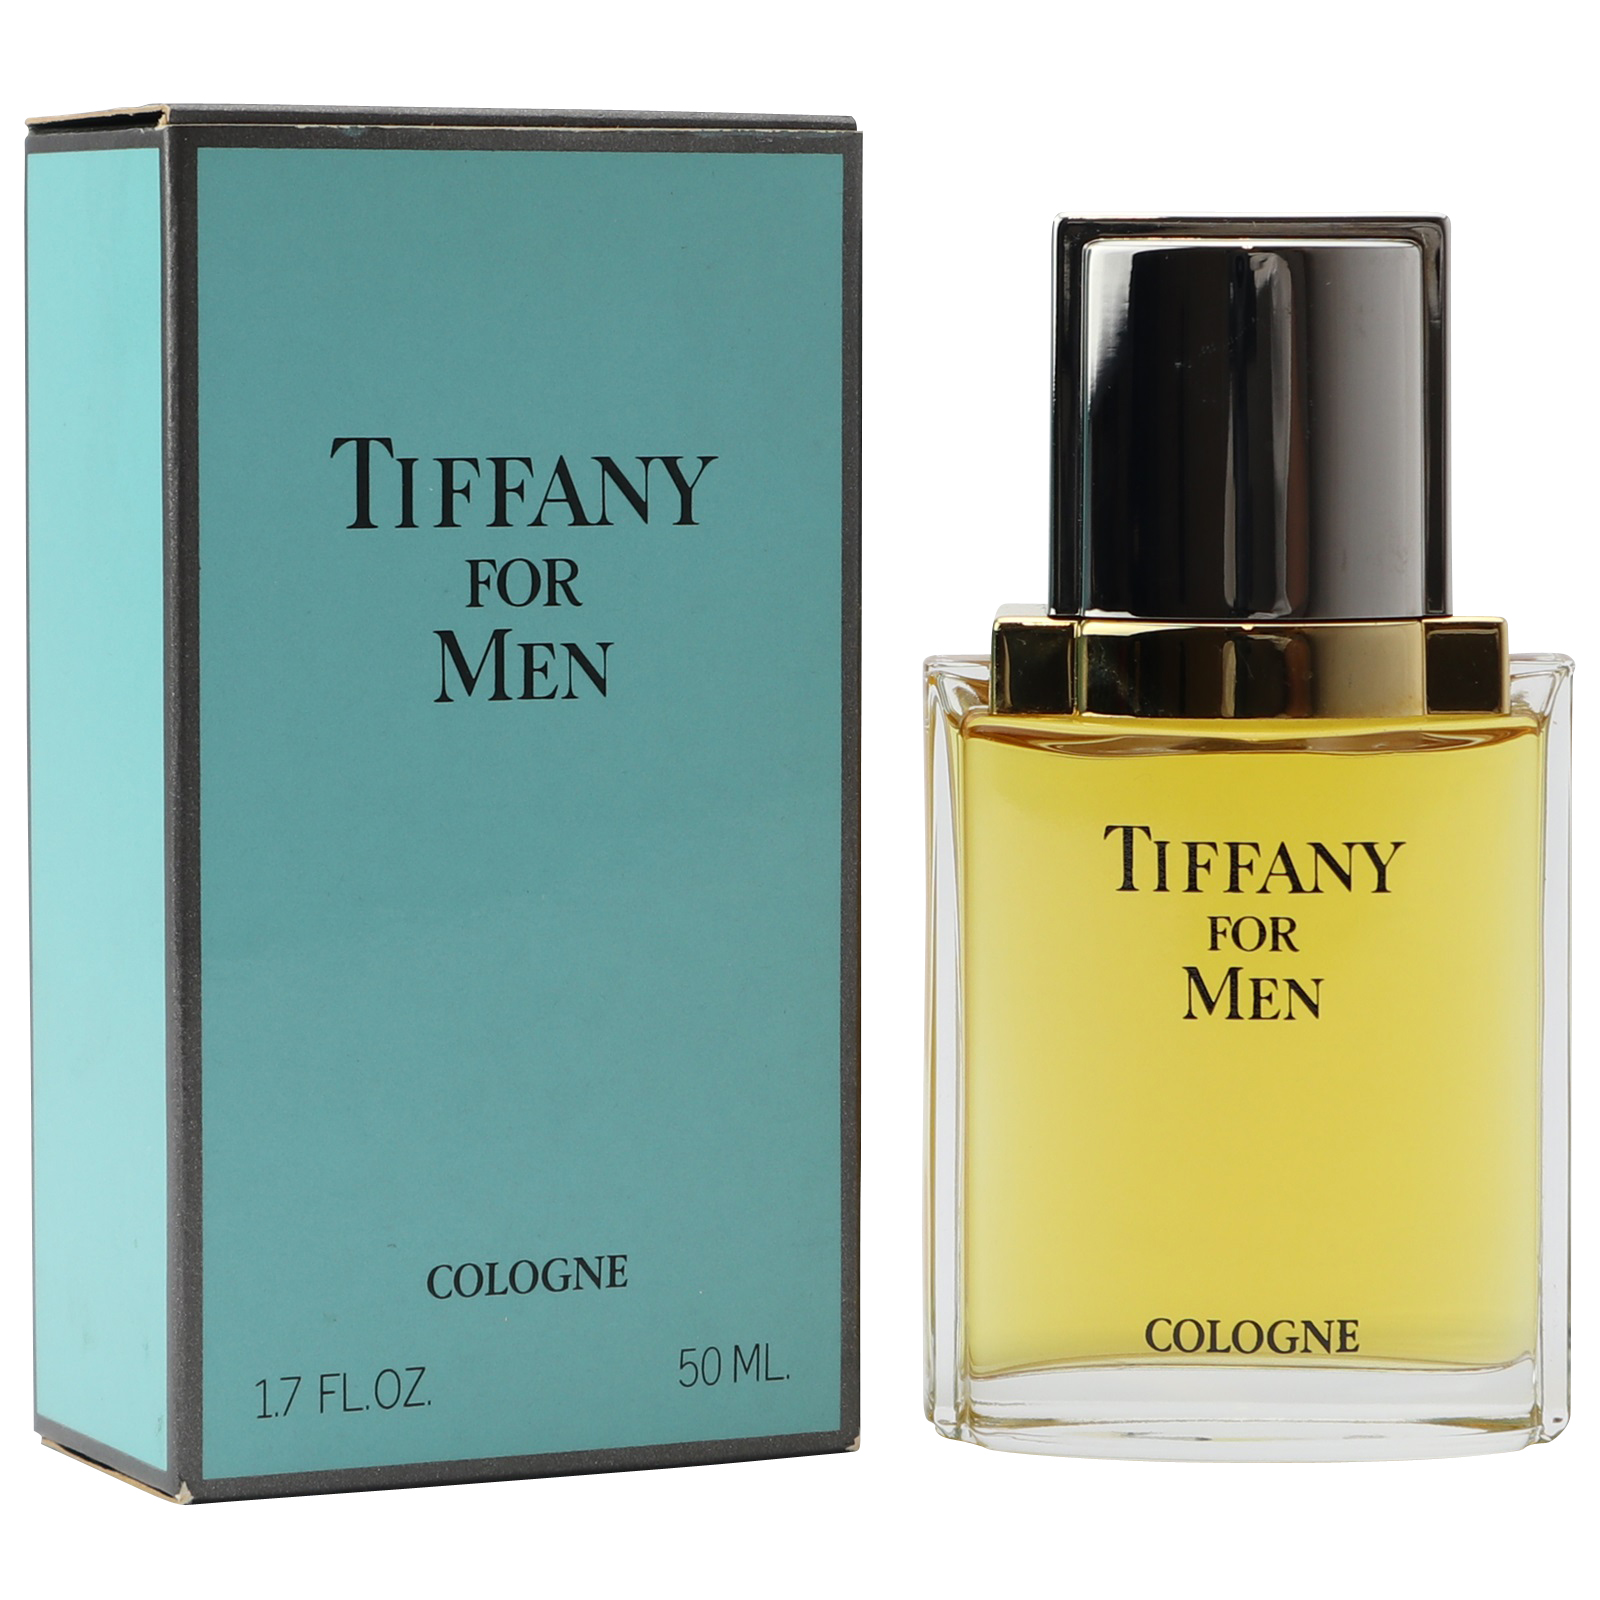 Tiffany for Men: The First Masculine Cologne By Tiffany ~ Vintages